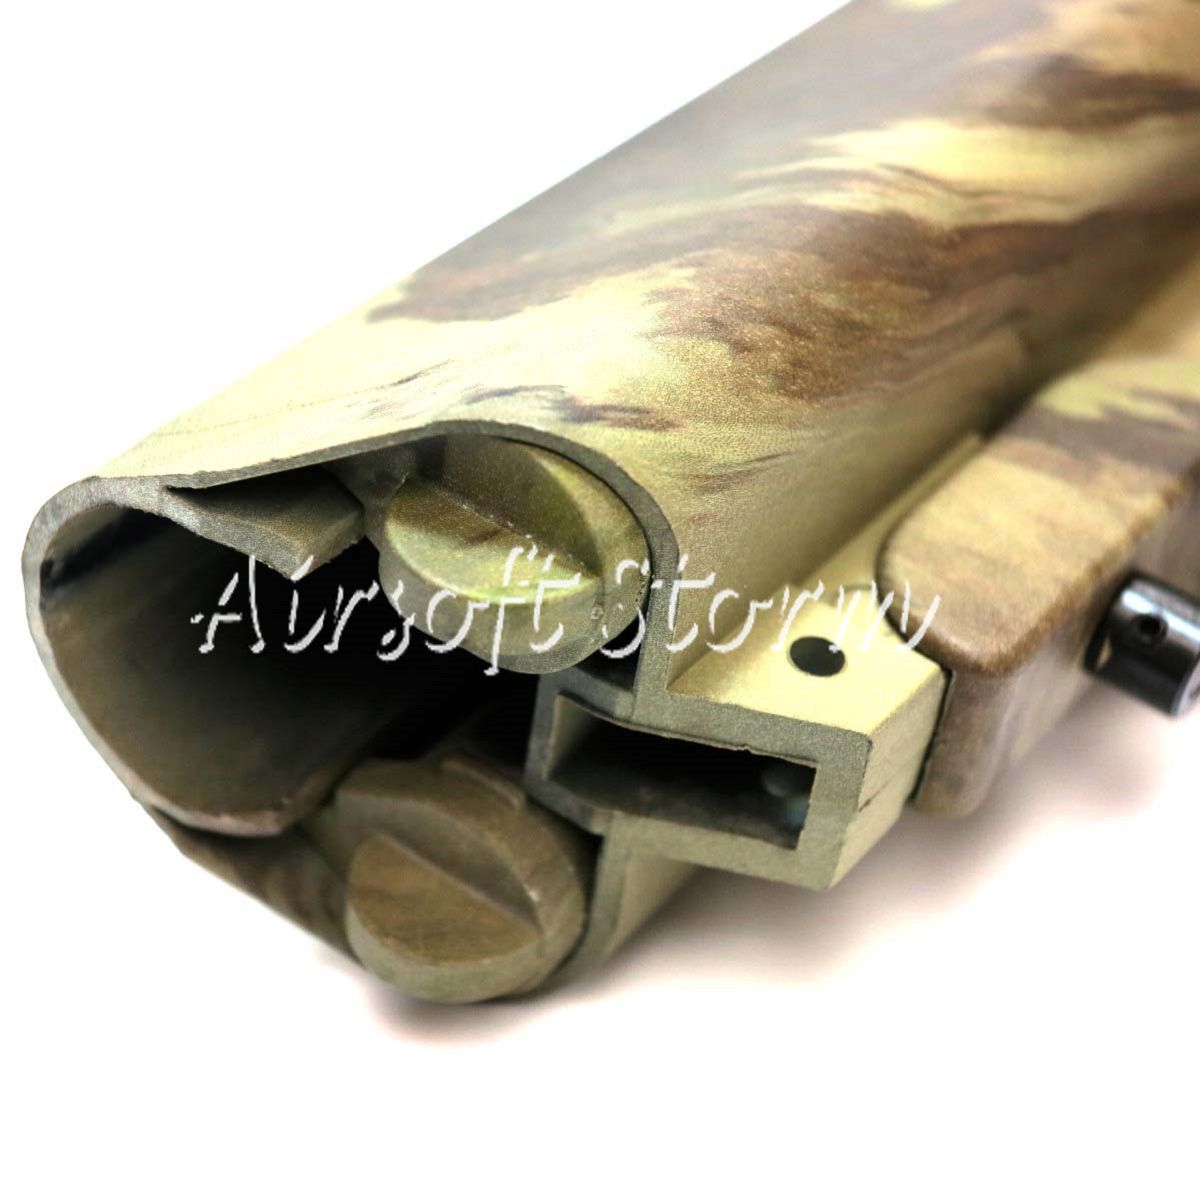 Airsoft Tactical Gear APS ASR Crane Airsoft AEG Stock With Sling Swivel A-TACS Camo